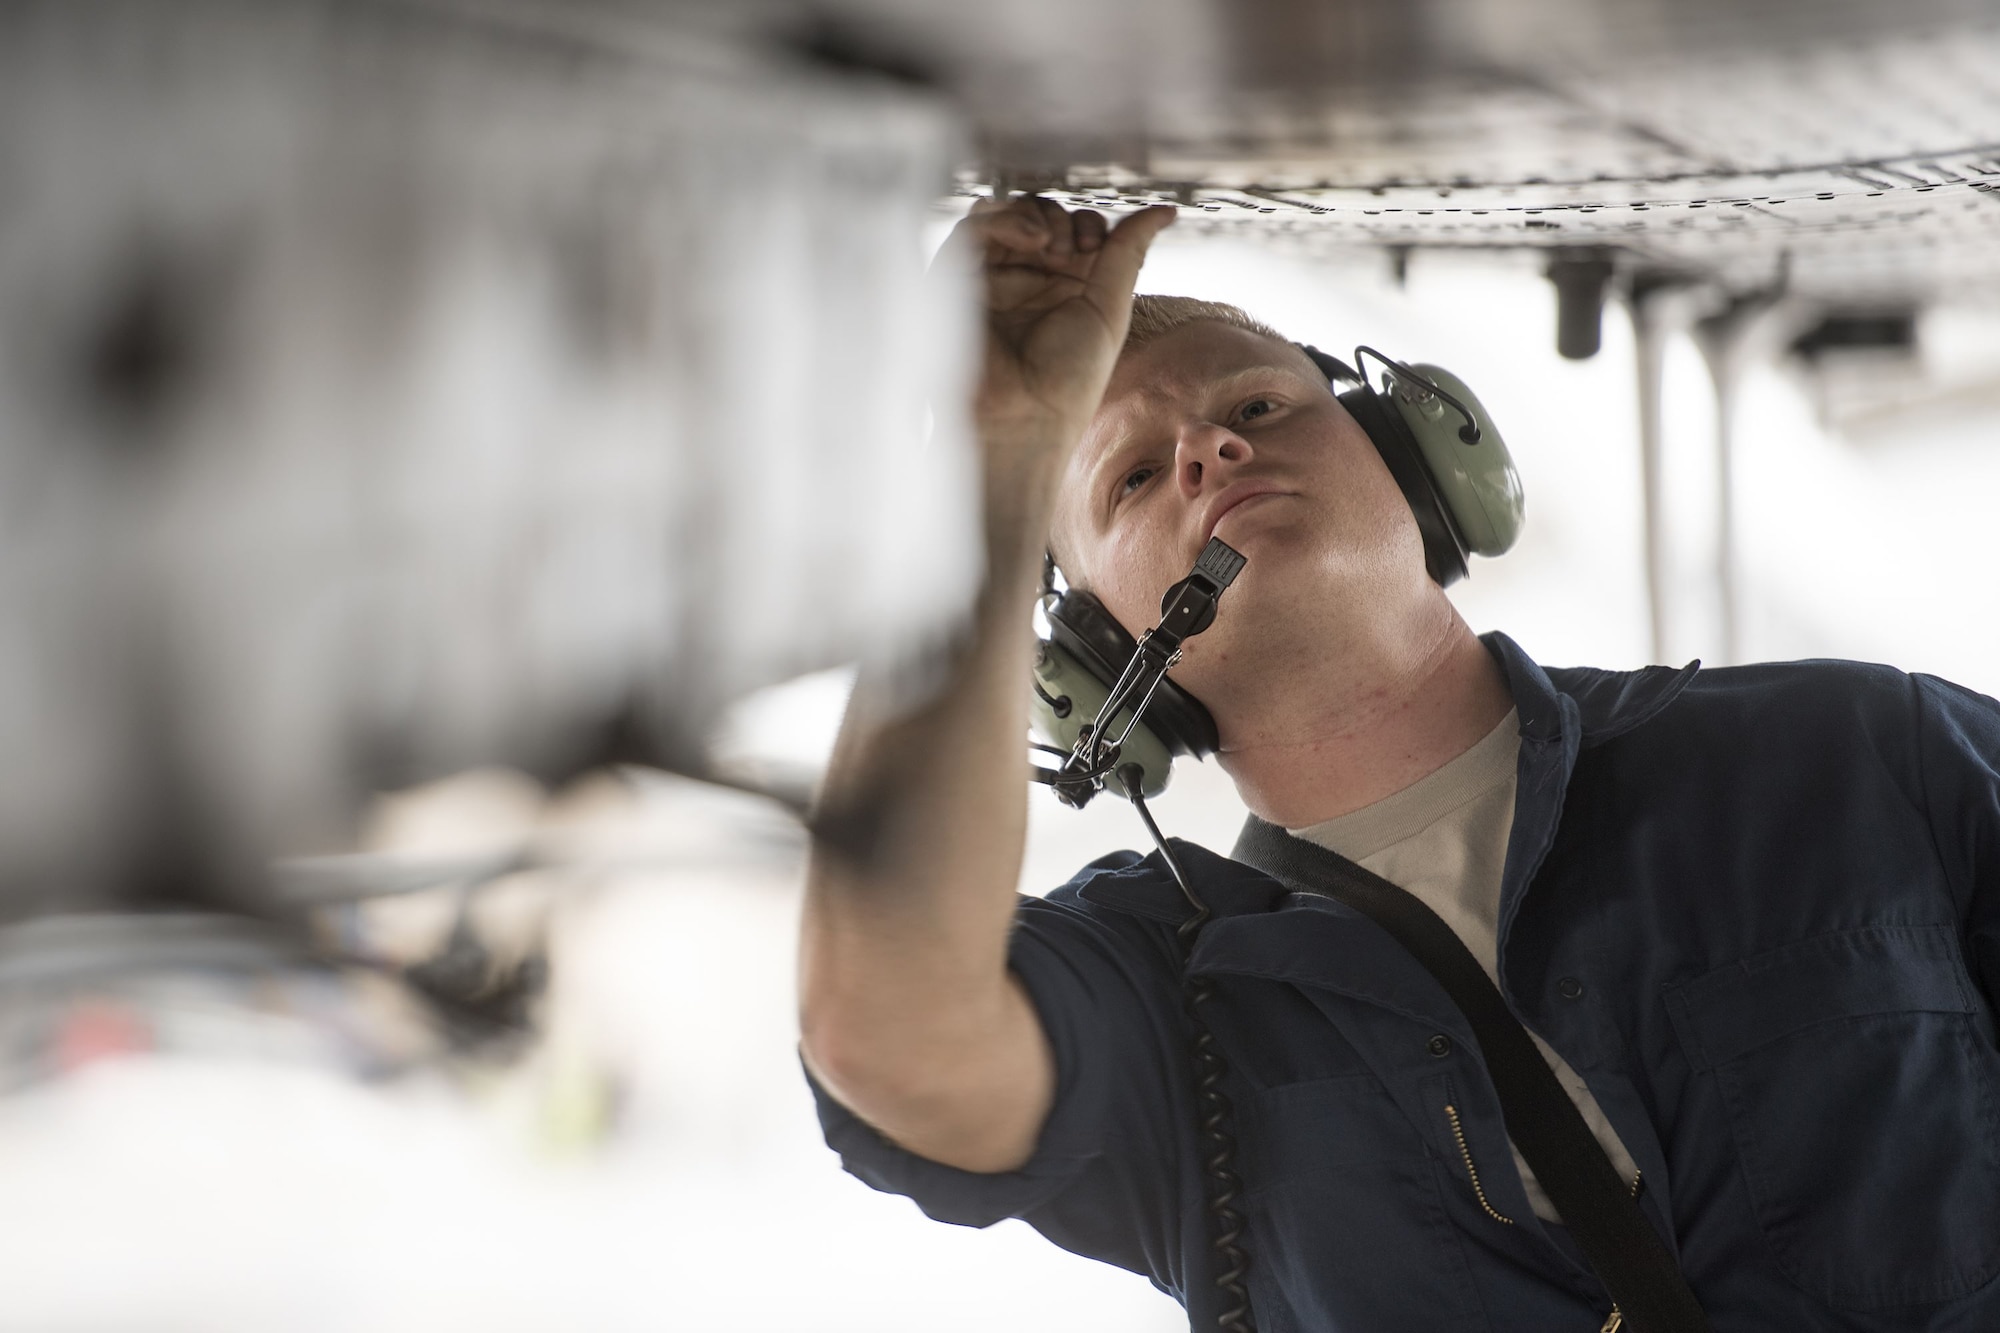 Airman 1st Class Tyler Boyd, 74th Aircraft Maintenance Unit crew chief, secures aircraft panels on the bottom of an A-10C Thunderbolt II during pre-flight checks, Dec. 6, 2017, at Moody Air Force Base, Ga. Moody’s week-long, Phase 1, Phase 2 exercise is designed to demonstrate the 23d Wing’s ability to meet combatant commander objectives and tested the pilots’ and maintainers’ ability to launch around-the-clock sorties at an accelerated rate during a sortie surge. (U.S. Air Force photo by Staff Sgt. Ryan Callaghan)